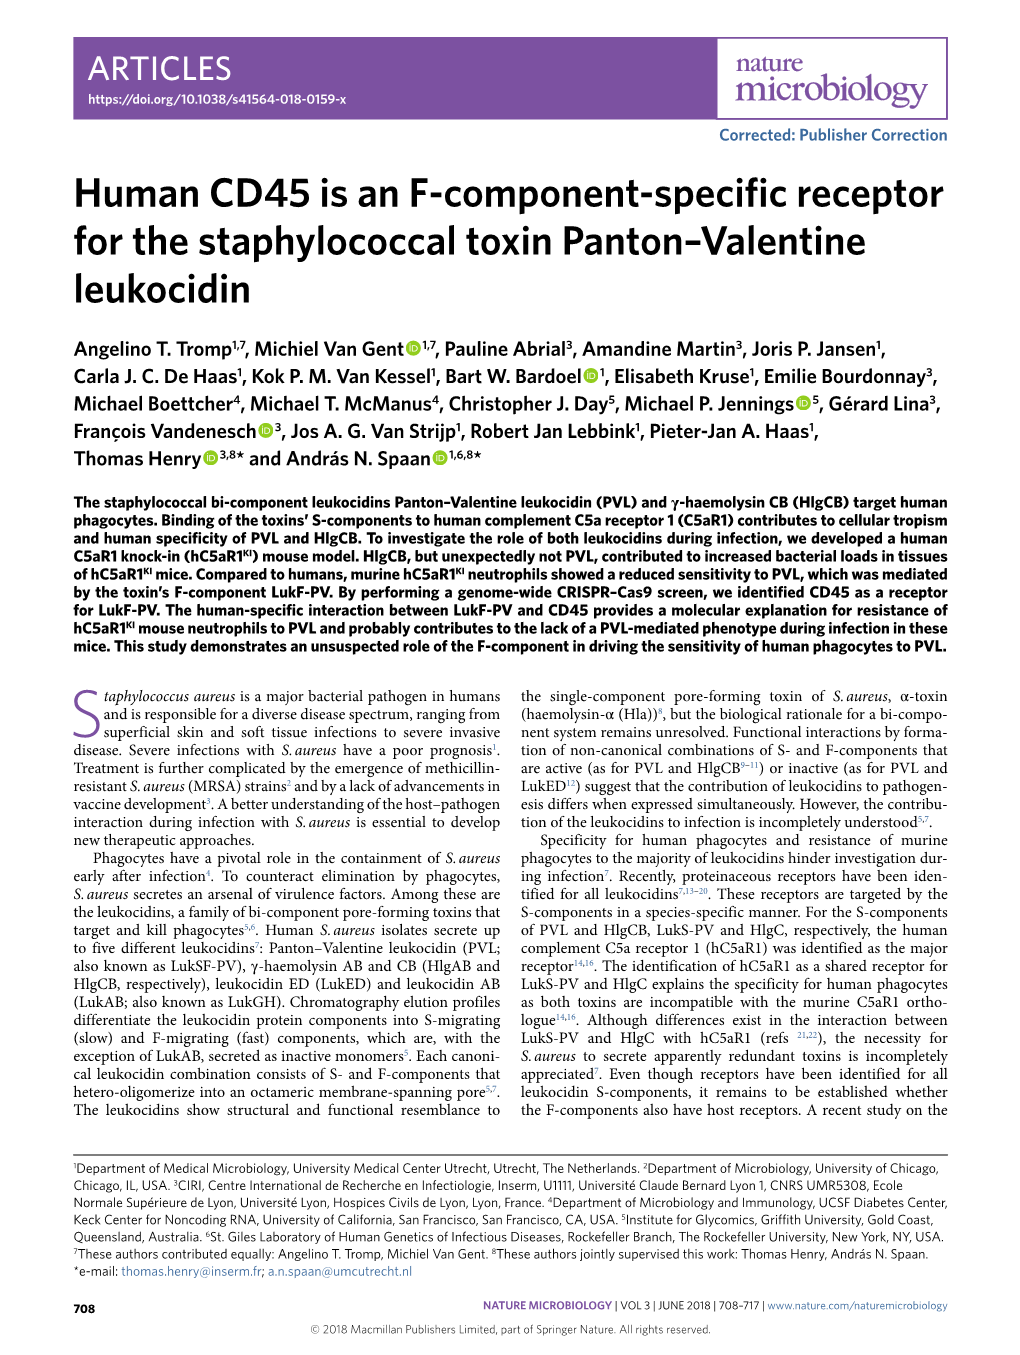 Human CD45 Is an F-Component-Specific Receptor for the Staphylococcal Toxin Panton–Valentine Leukocidin